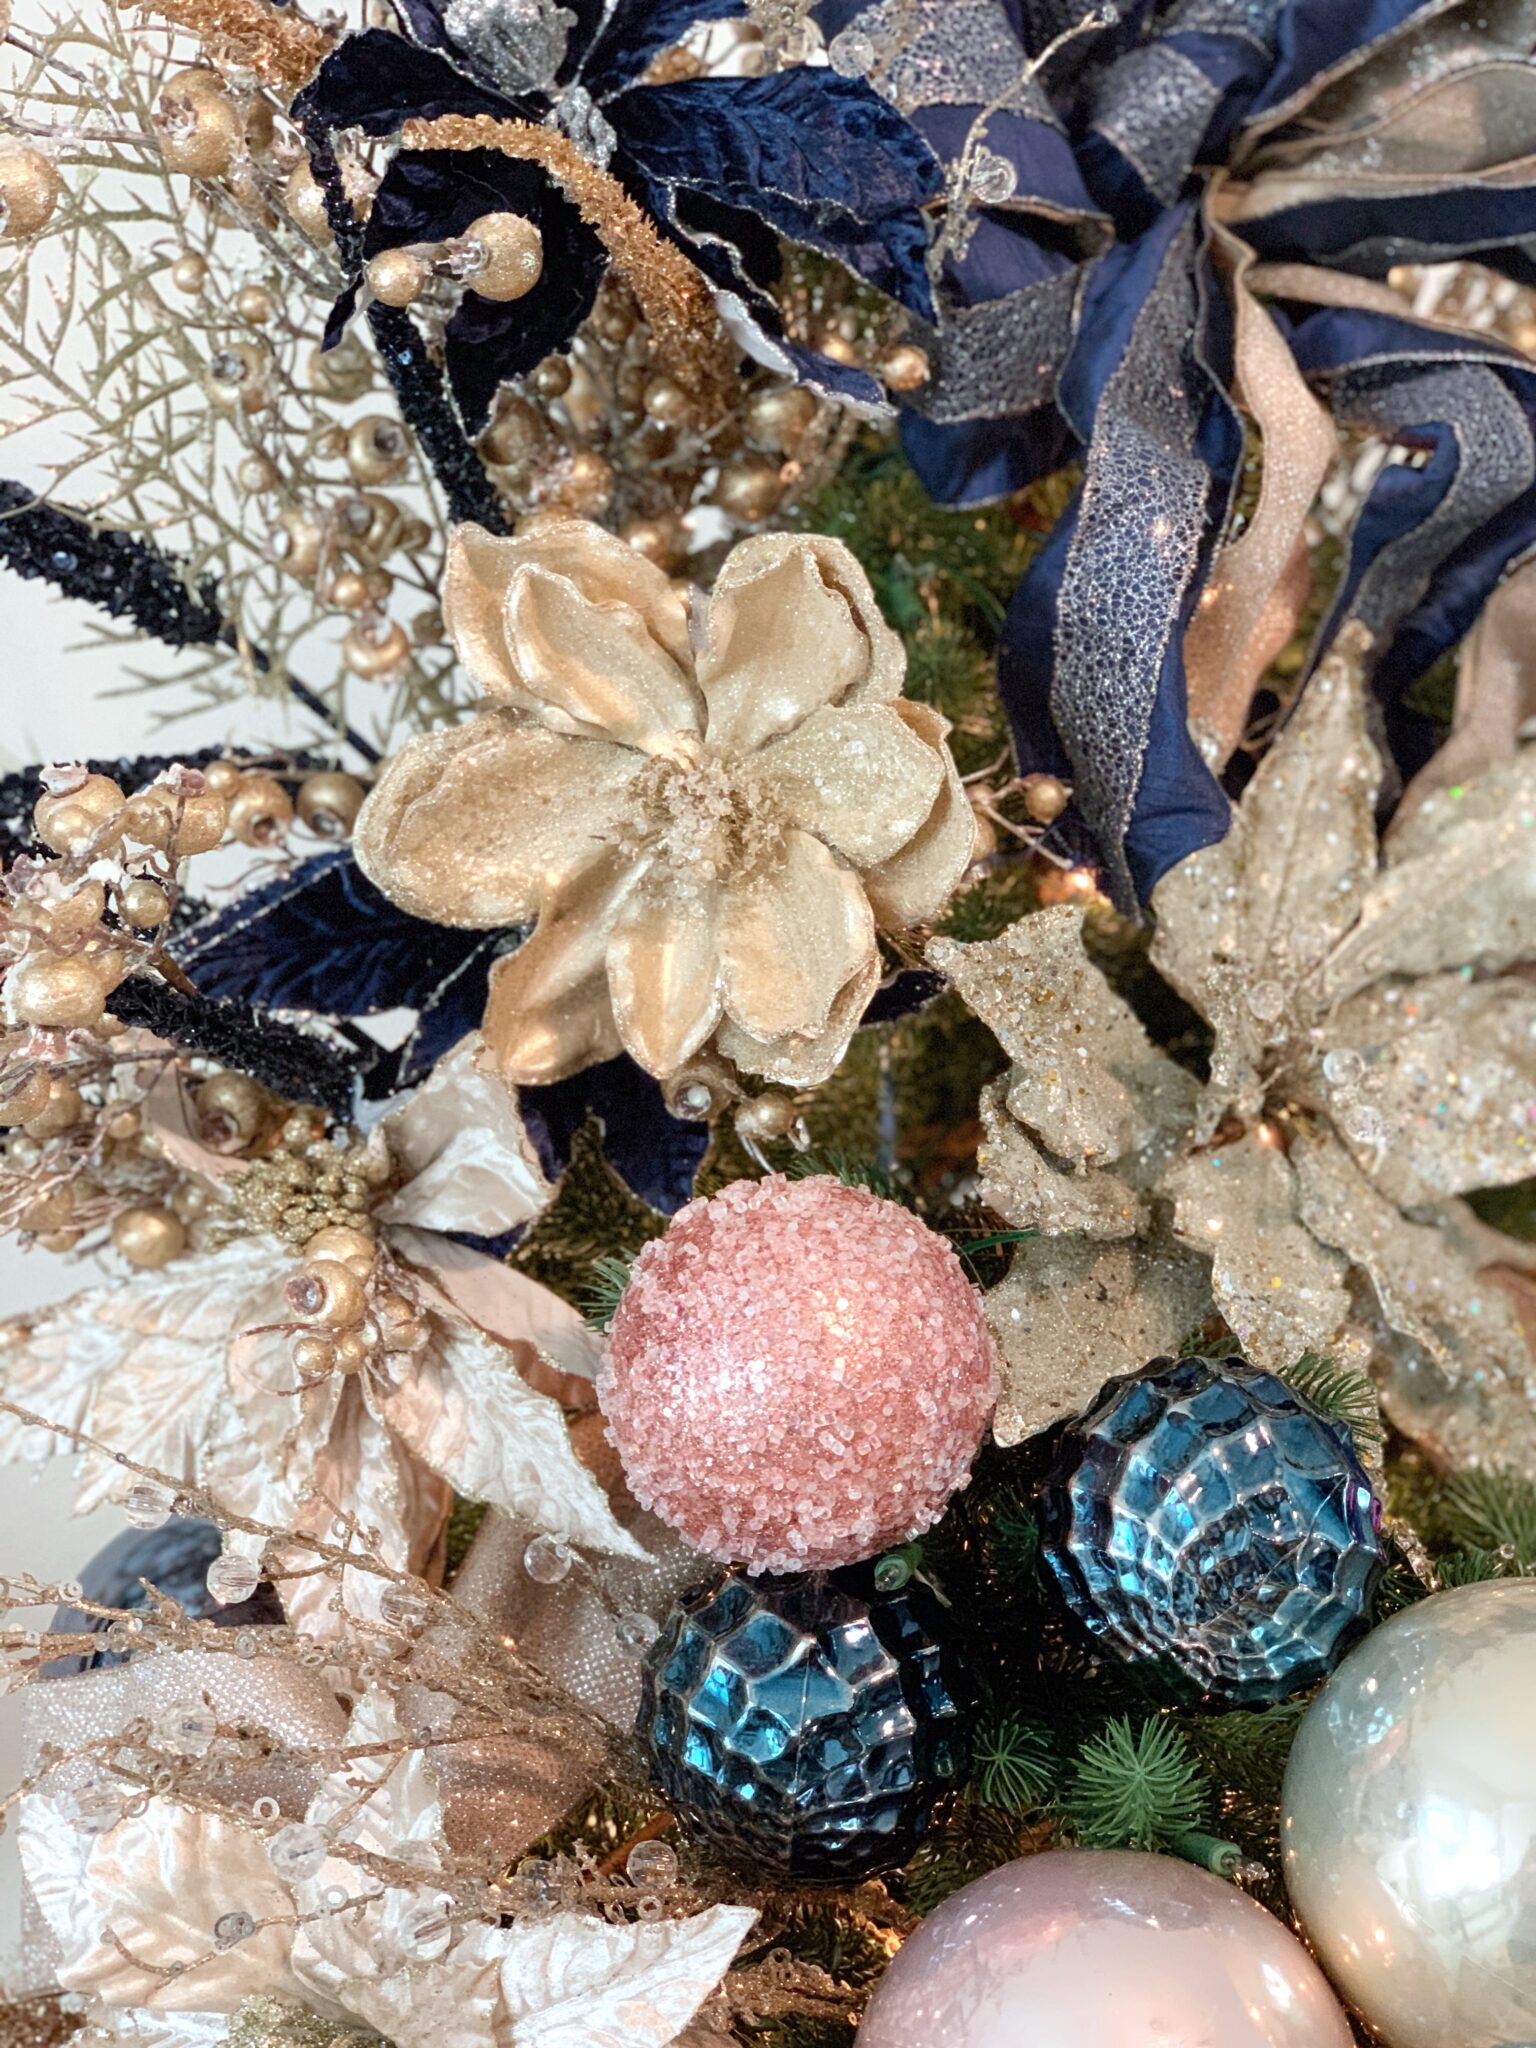 Blue Christmas Magic: Transform Your Holiday with Stunning Blue Decorations